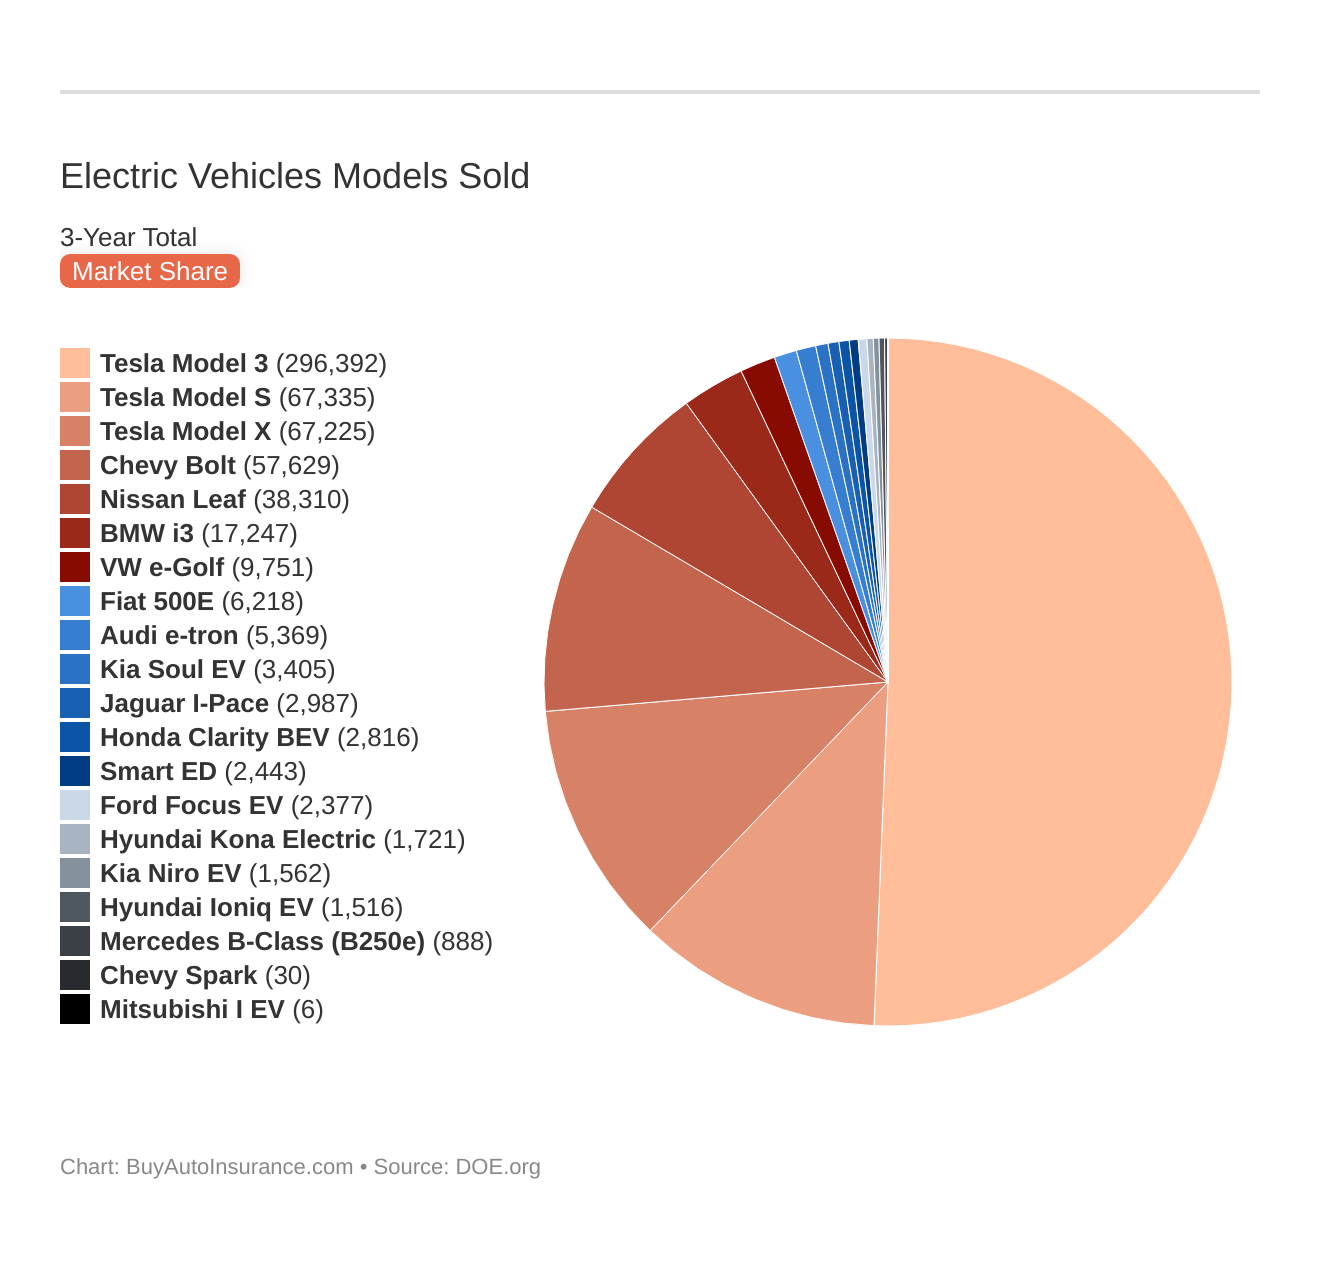 Electric Vehicles Models Sold